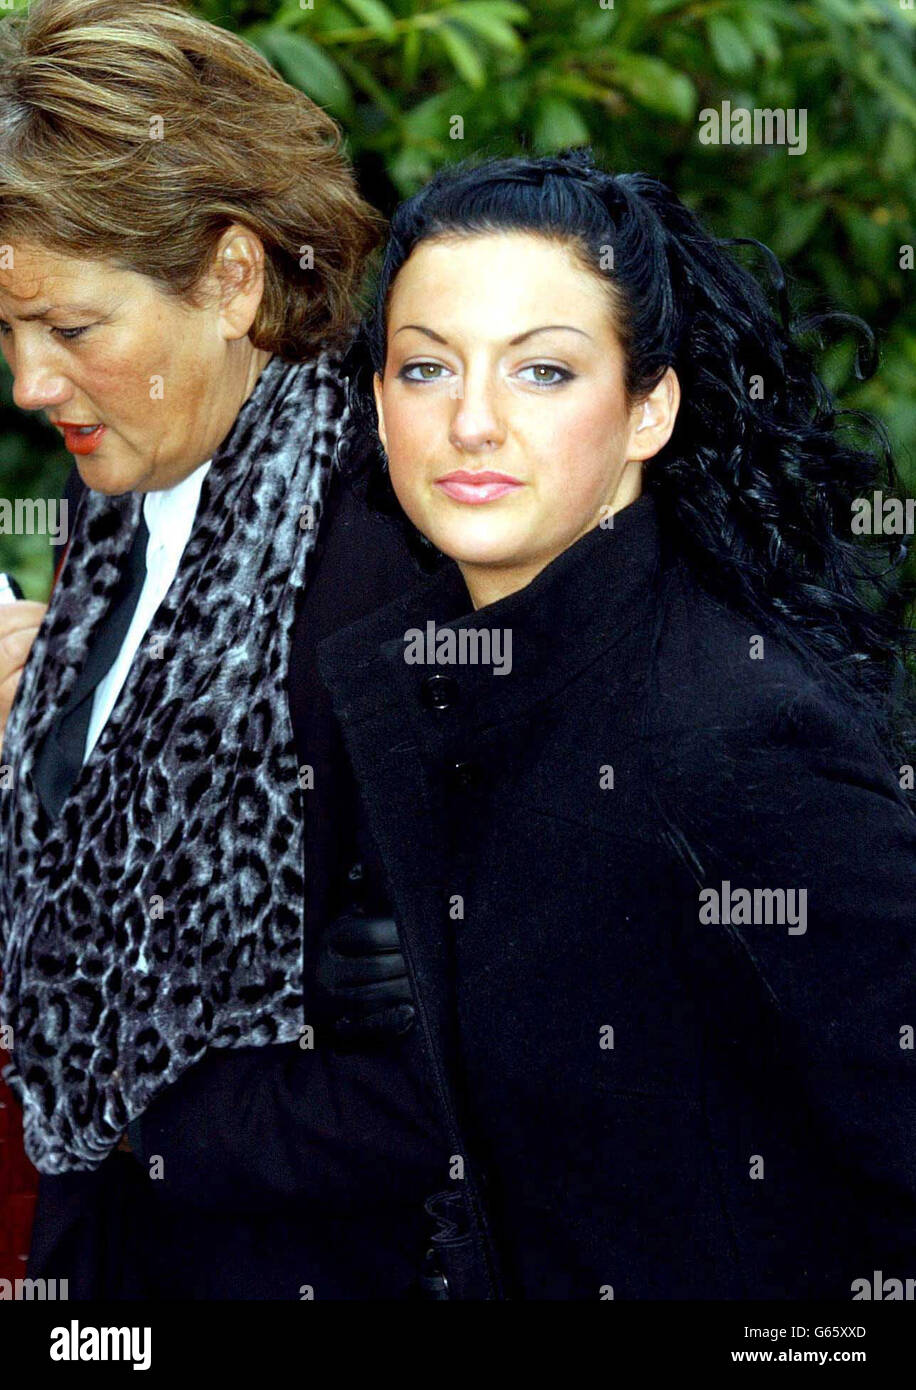 Former Miss World contestant, Sophie Cahill (right), arrives at Newport (Gwent) Crown Court to deny a bottle attack on another woman in a nightclub. Ms Cahill, 19, who won the Miss Wales contest in 2000, is accused of wounding with intent to inflict grievous bodily harm. * .... and an alternative charge of wounding in November 2002 in the Jimmy Dean night spot in Chepstow, South Wales. Stock Photo